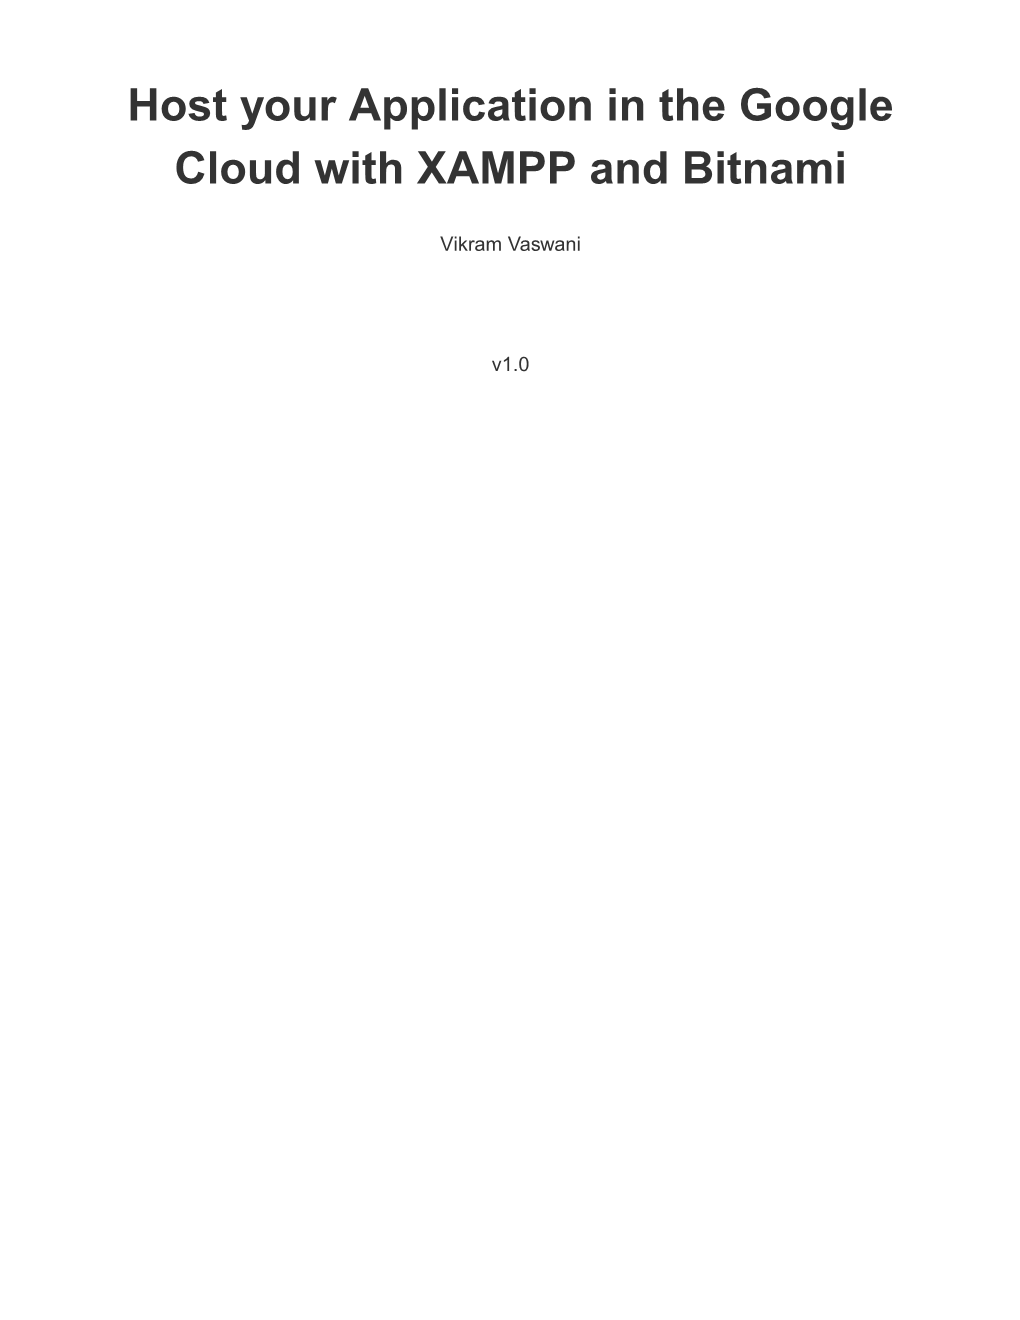 Host Your Application in the Google Cloud with XAMPP and Bitnami